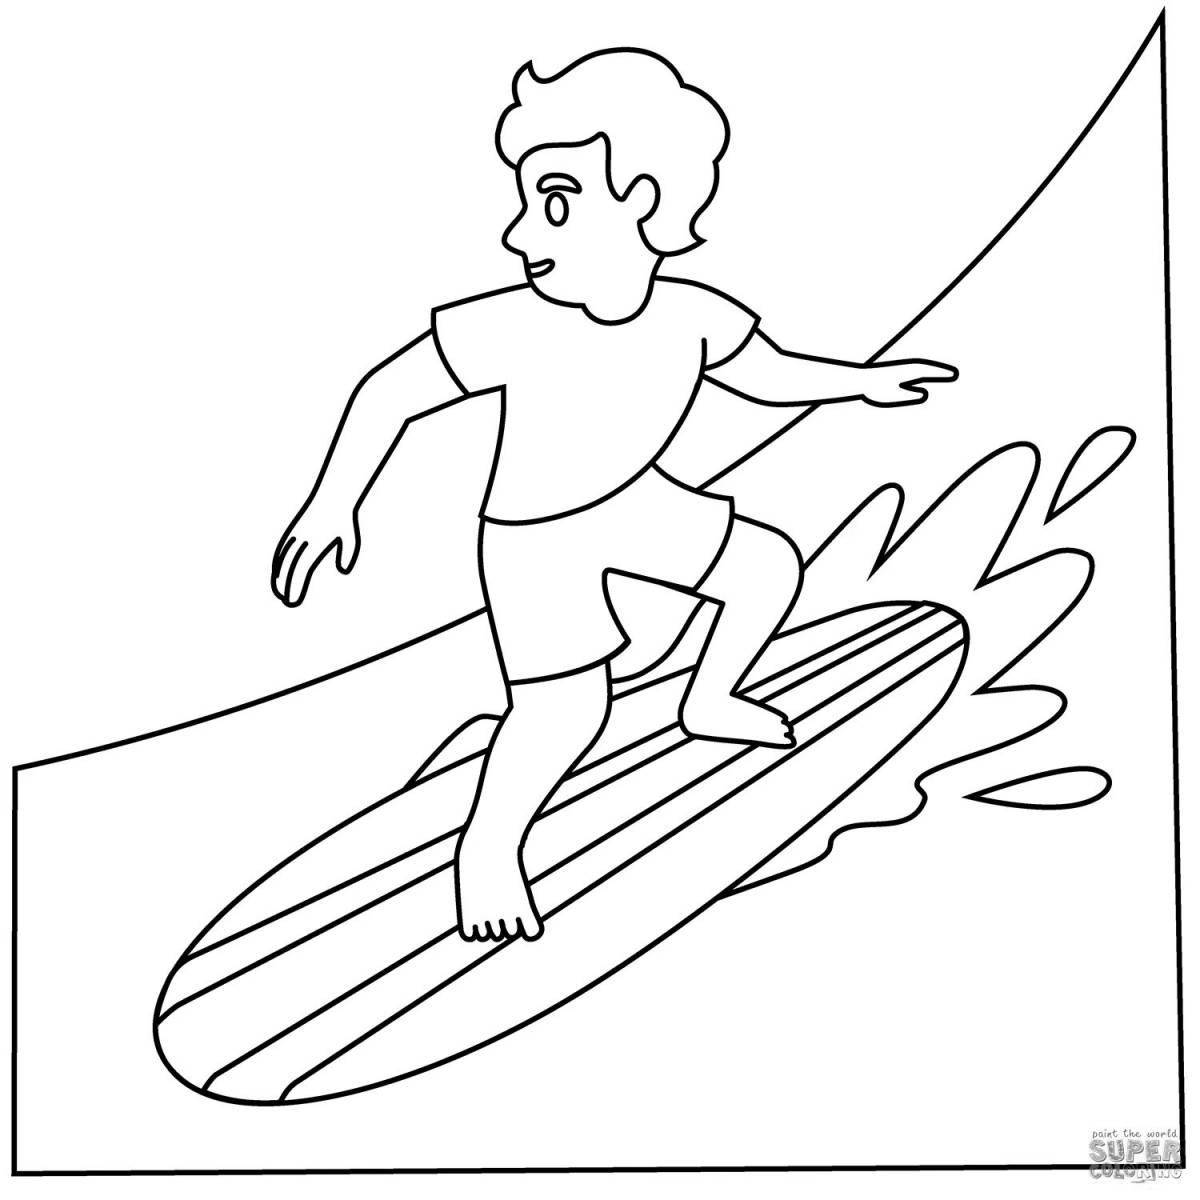 Surf bright coloring page